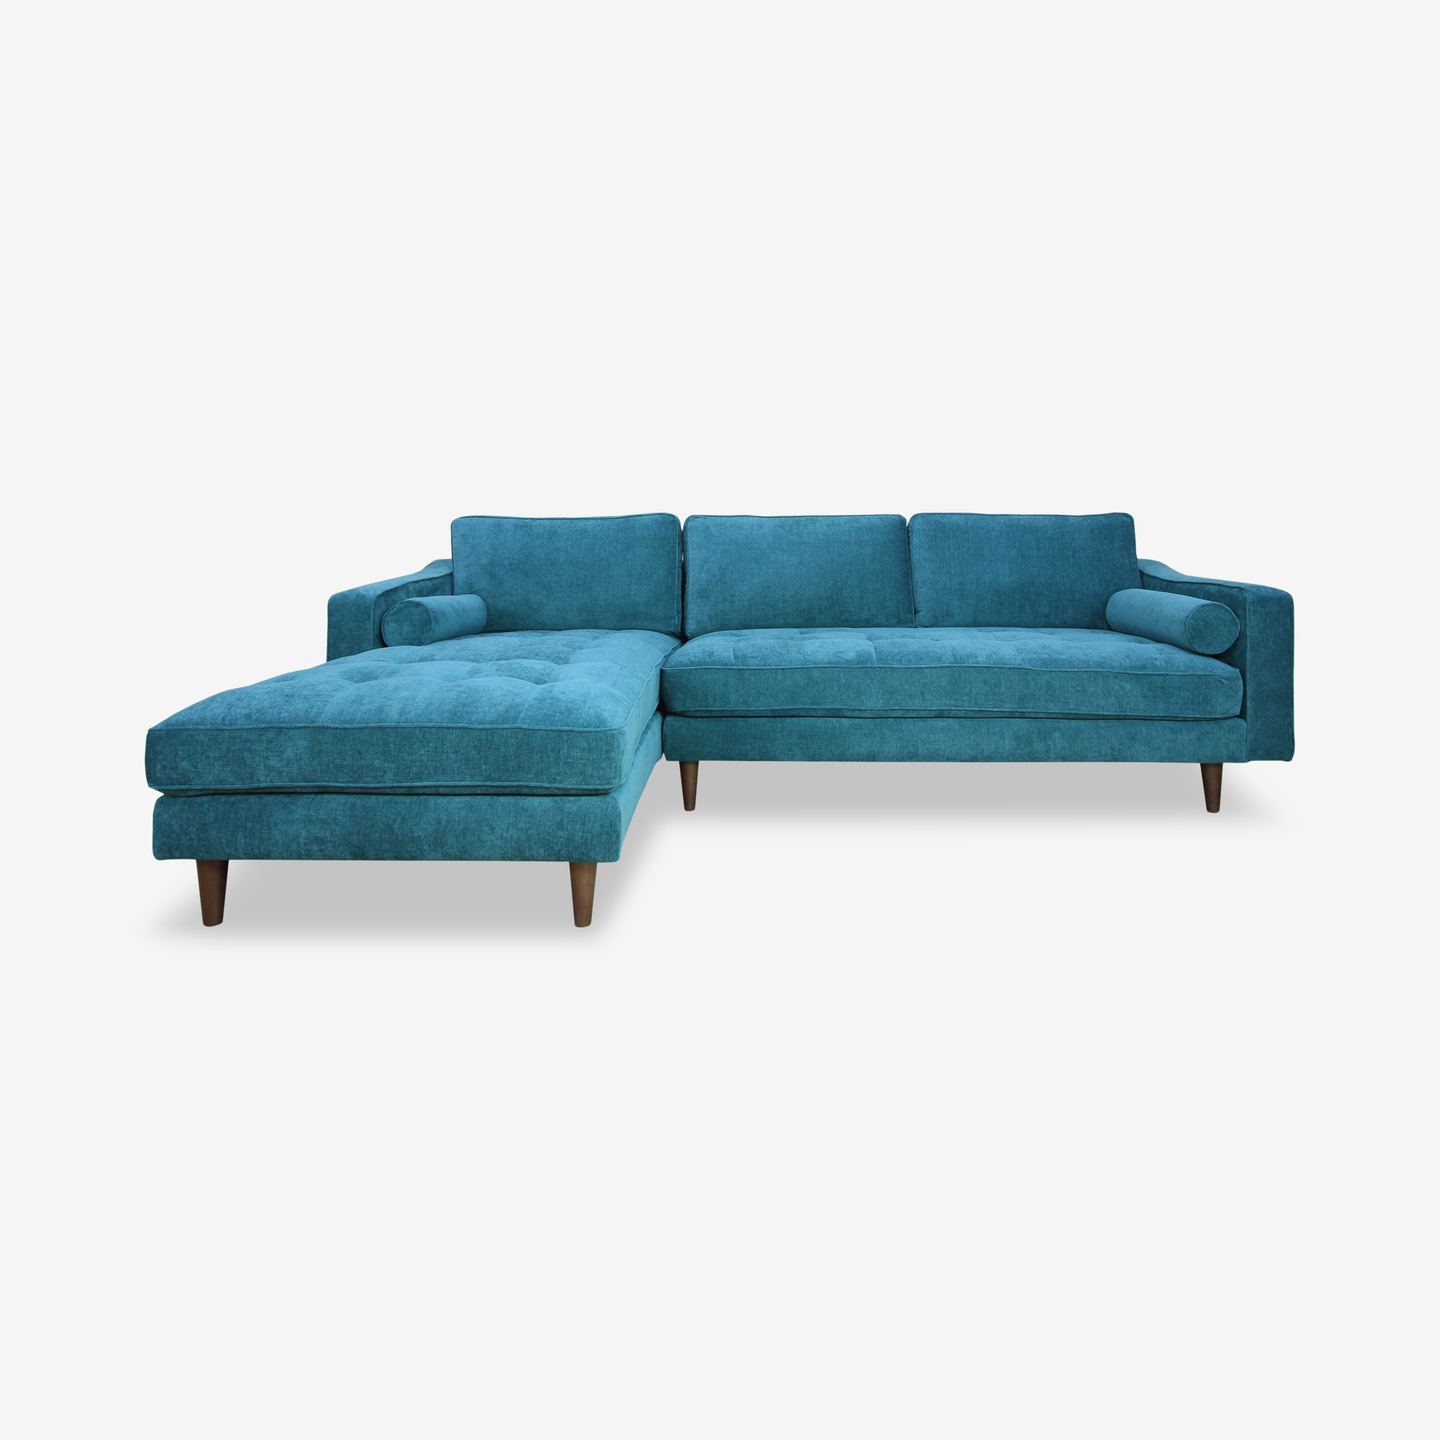 1178_Martell-Sectional-LHF-Turquoise_front_2020